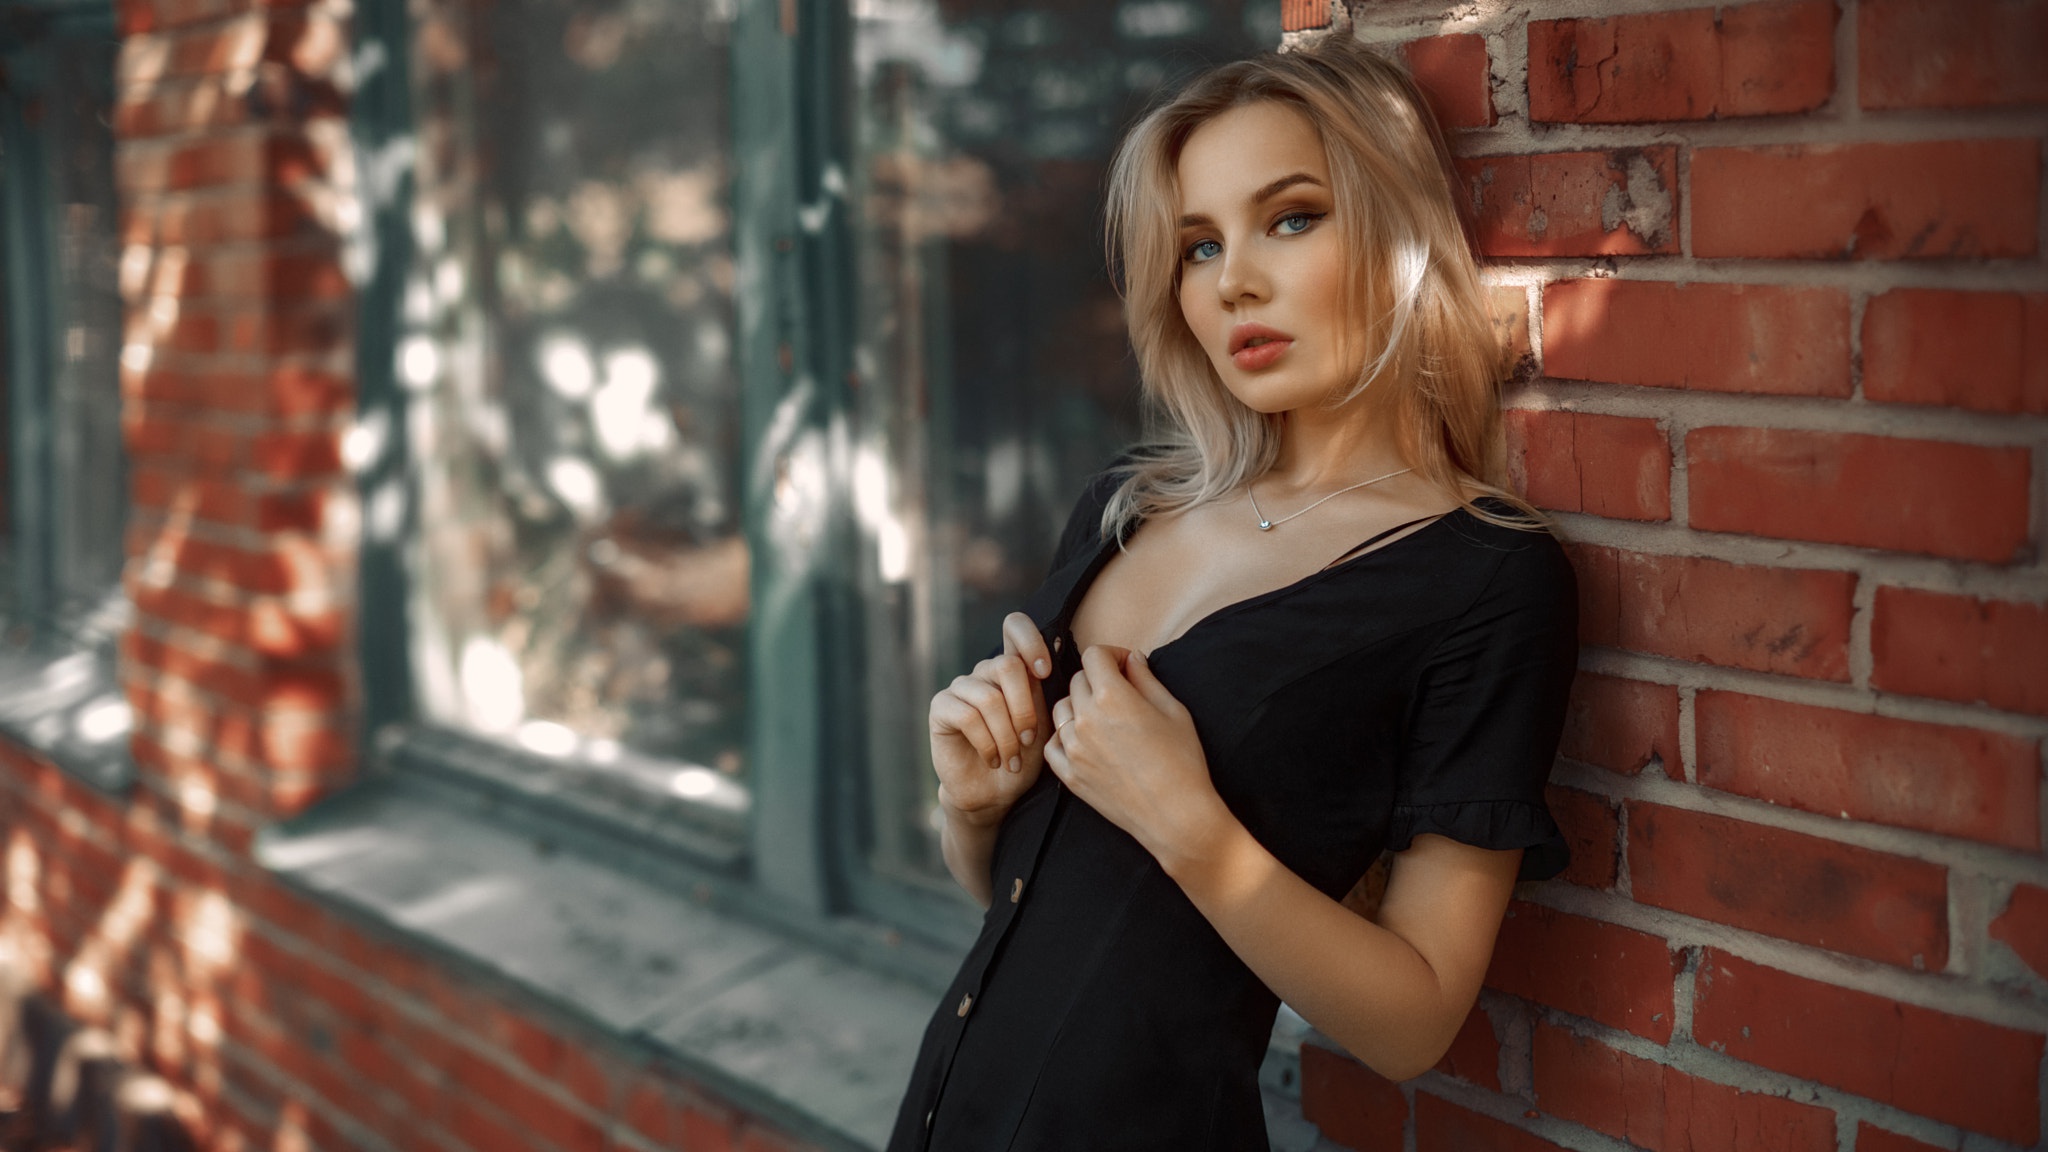 People 2048x1152 Andrey Metelkov model women blonde blue eyes lipstick red lipstick parted lips dress necklace wall bricks window looking at viewer